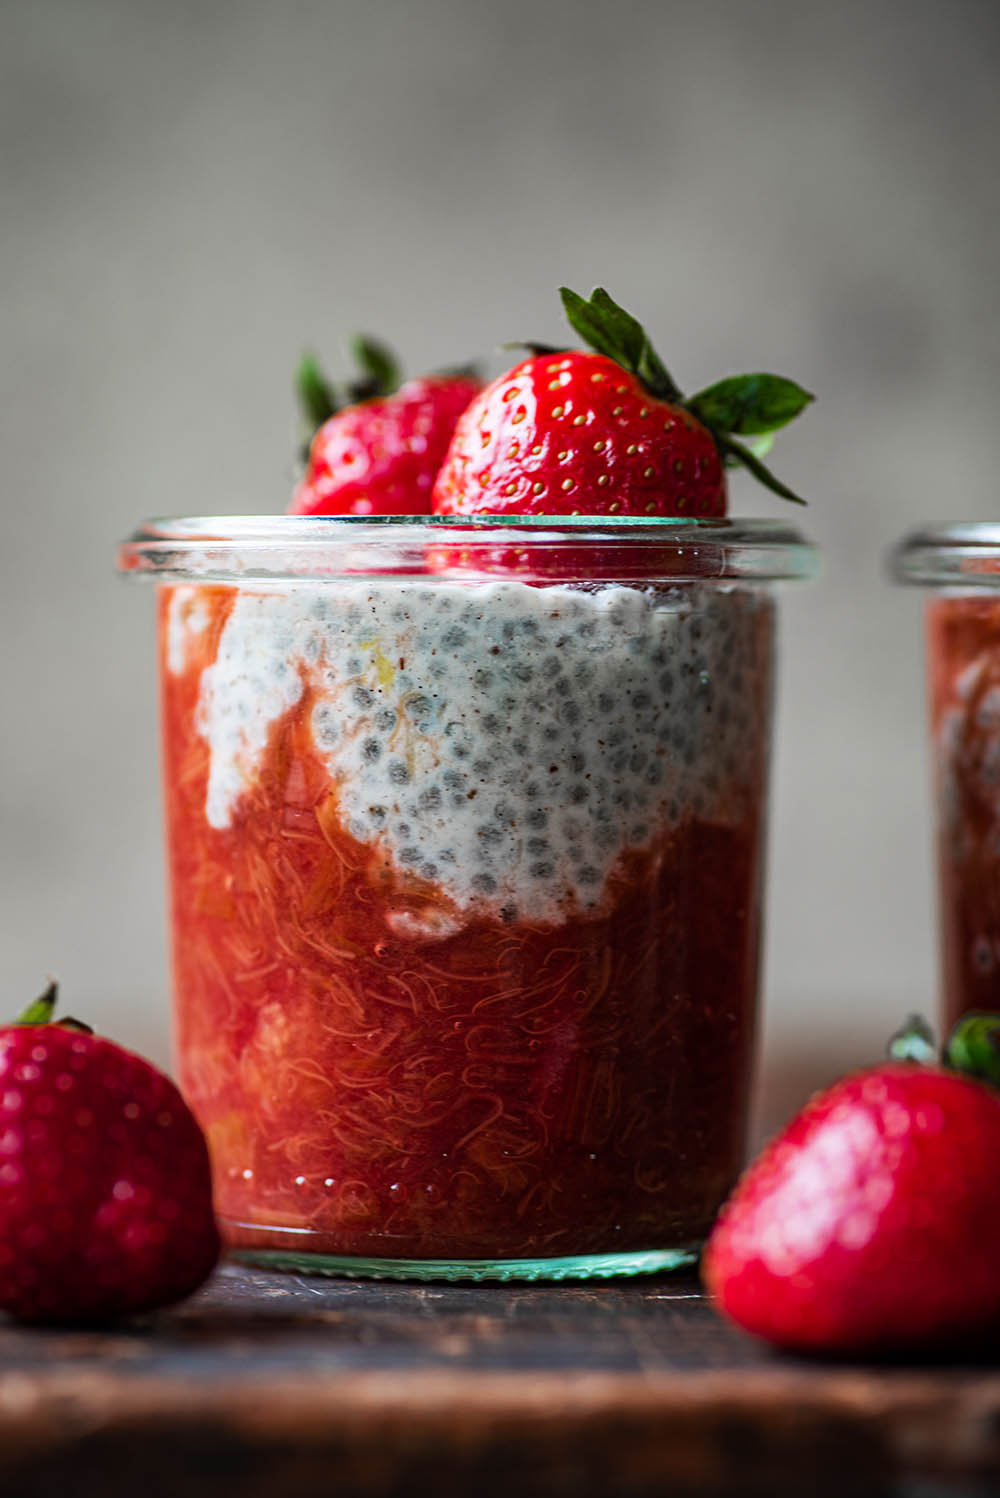 Close up of a jar with rhubarb compote and chia pudding.